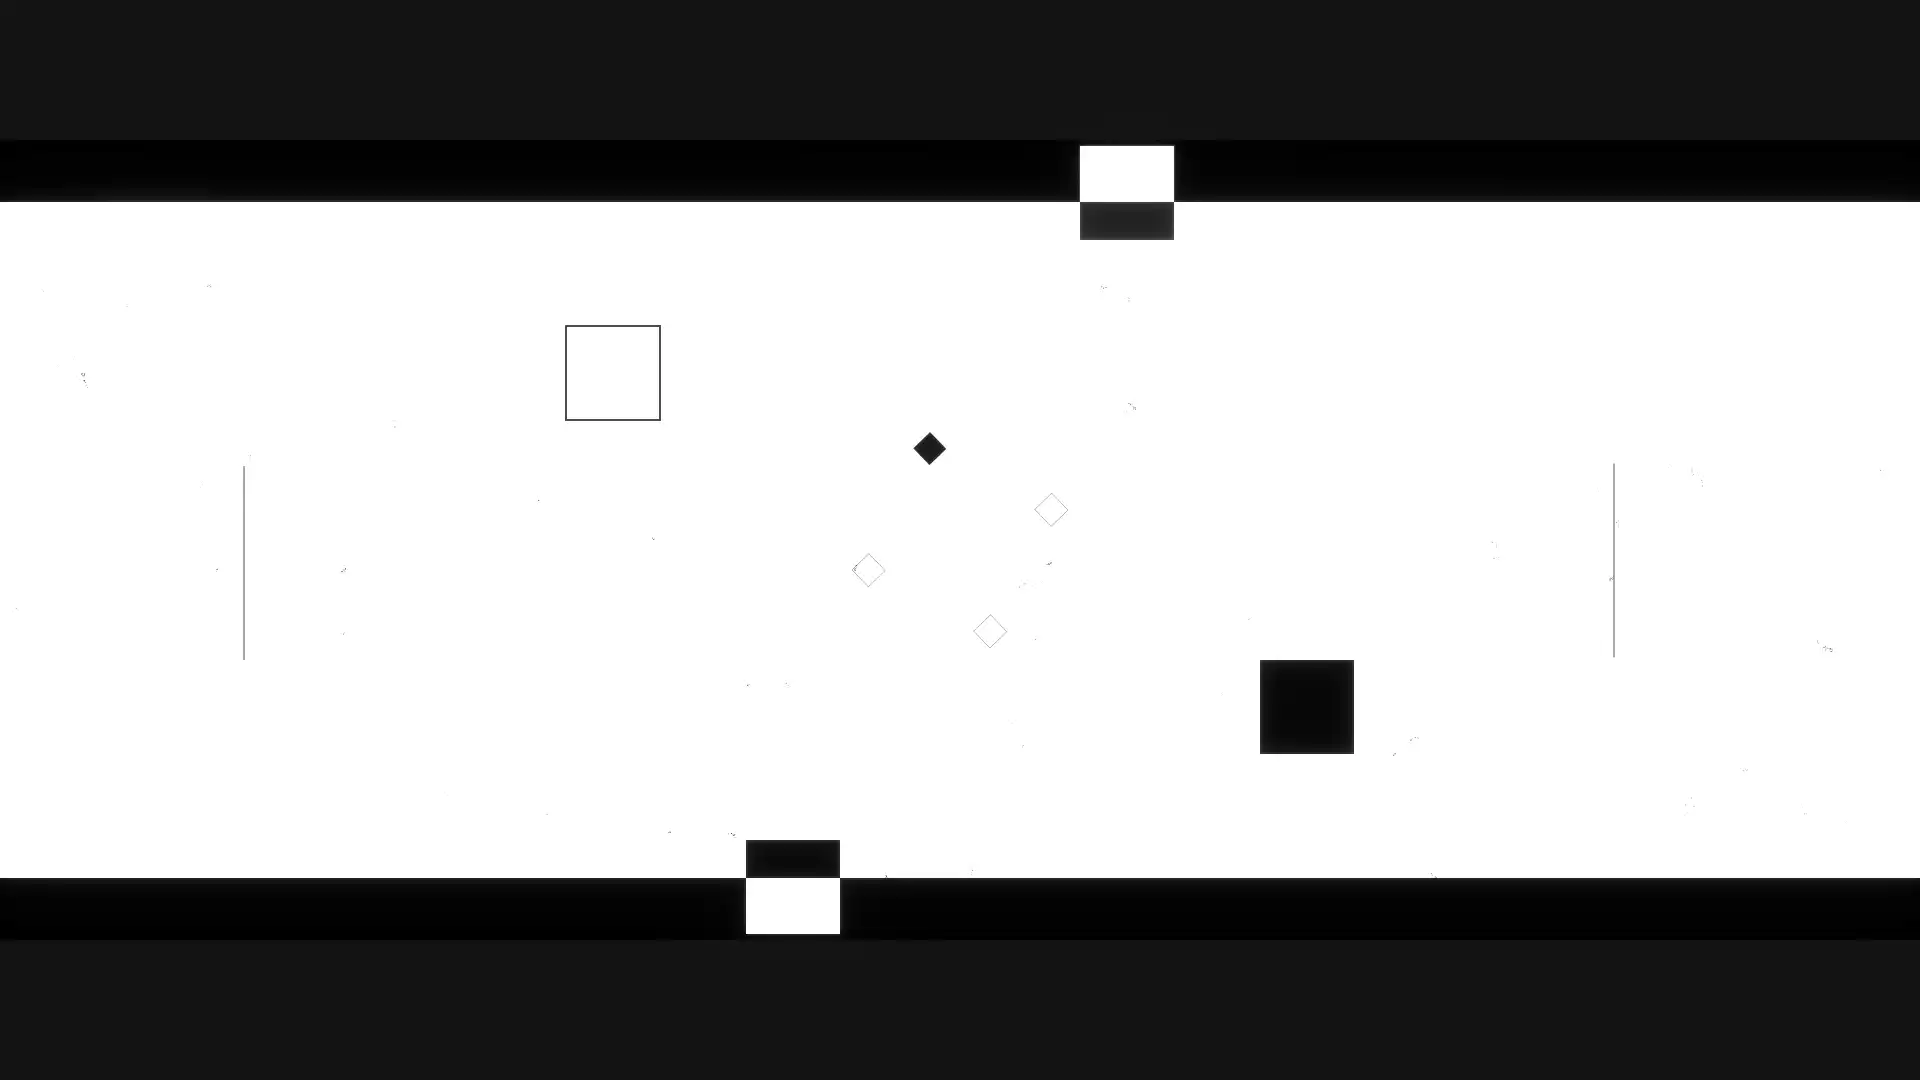 still image from the demo reel showing motion graphics consisting of black and white shapes, mostly rectangle and lines.